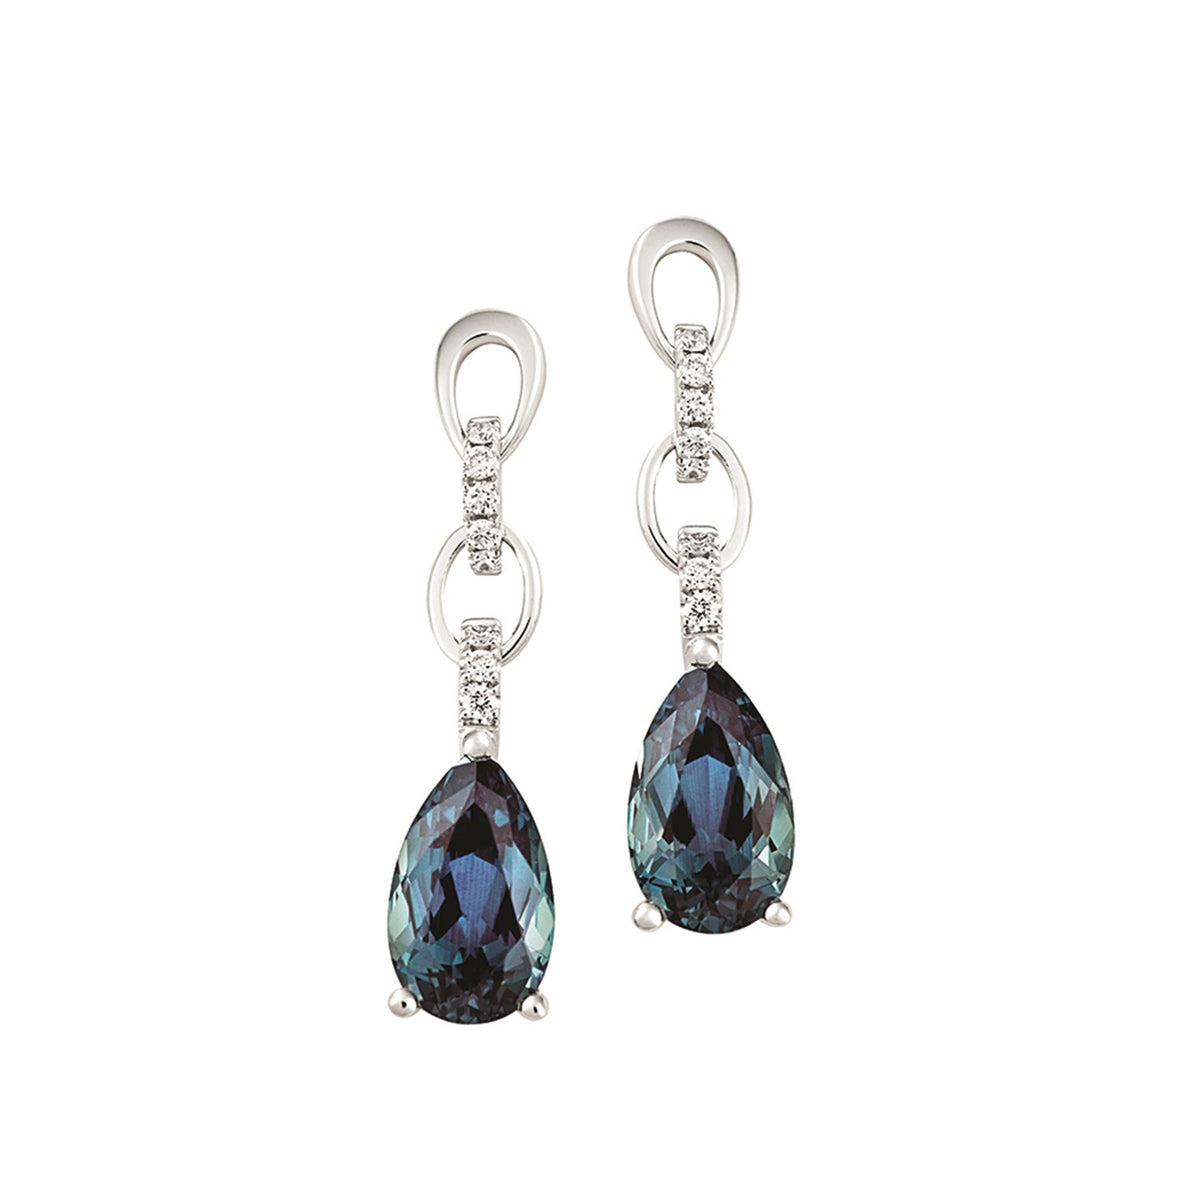 14Kt White Gold Dangle Earrings With 3.73ct Chatham Lab Created Alexandrite